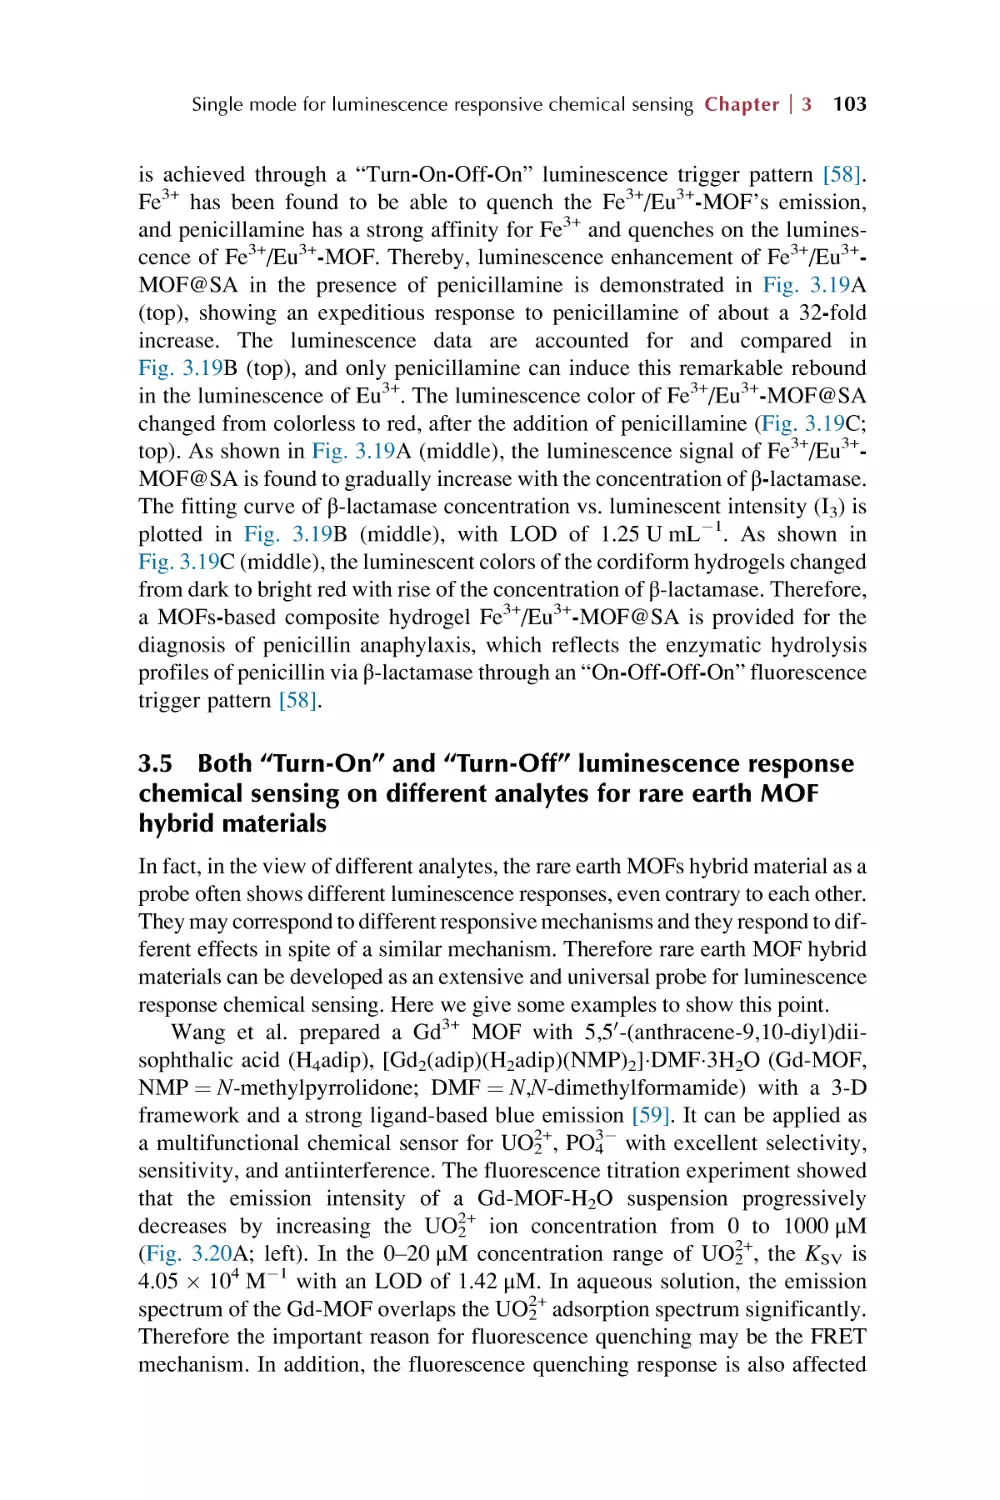 3.5. Both ``Turn-On´´ and ``Turn-Off´´ luminescence response chemical sensing on different analytes for rare earth MOF hy ...